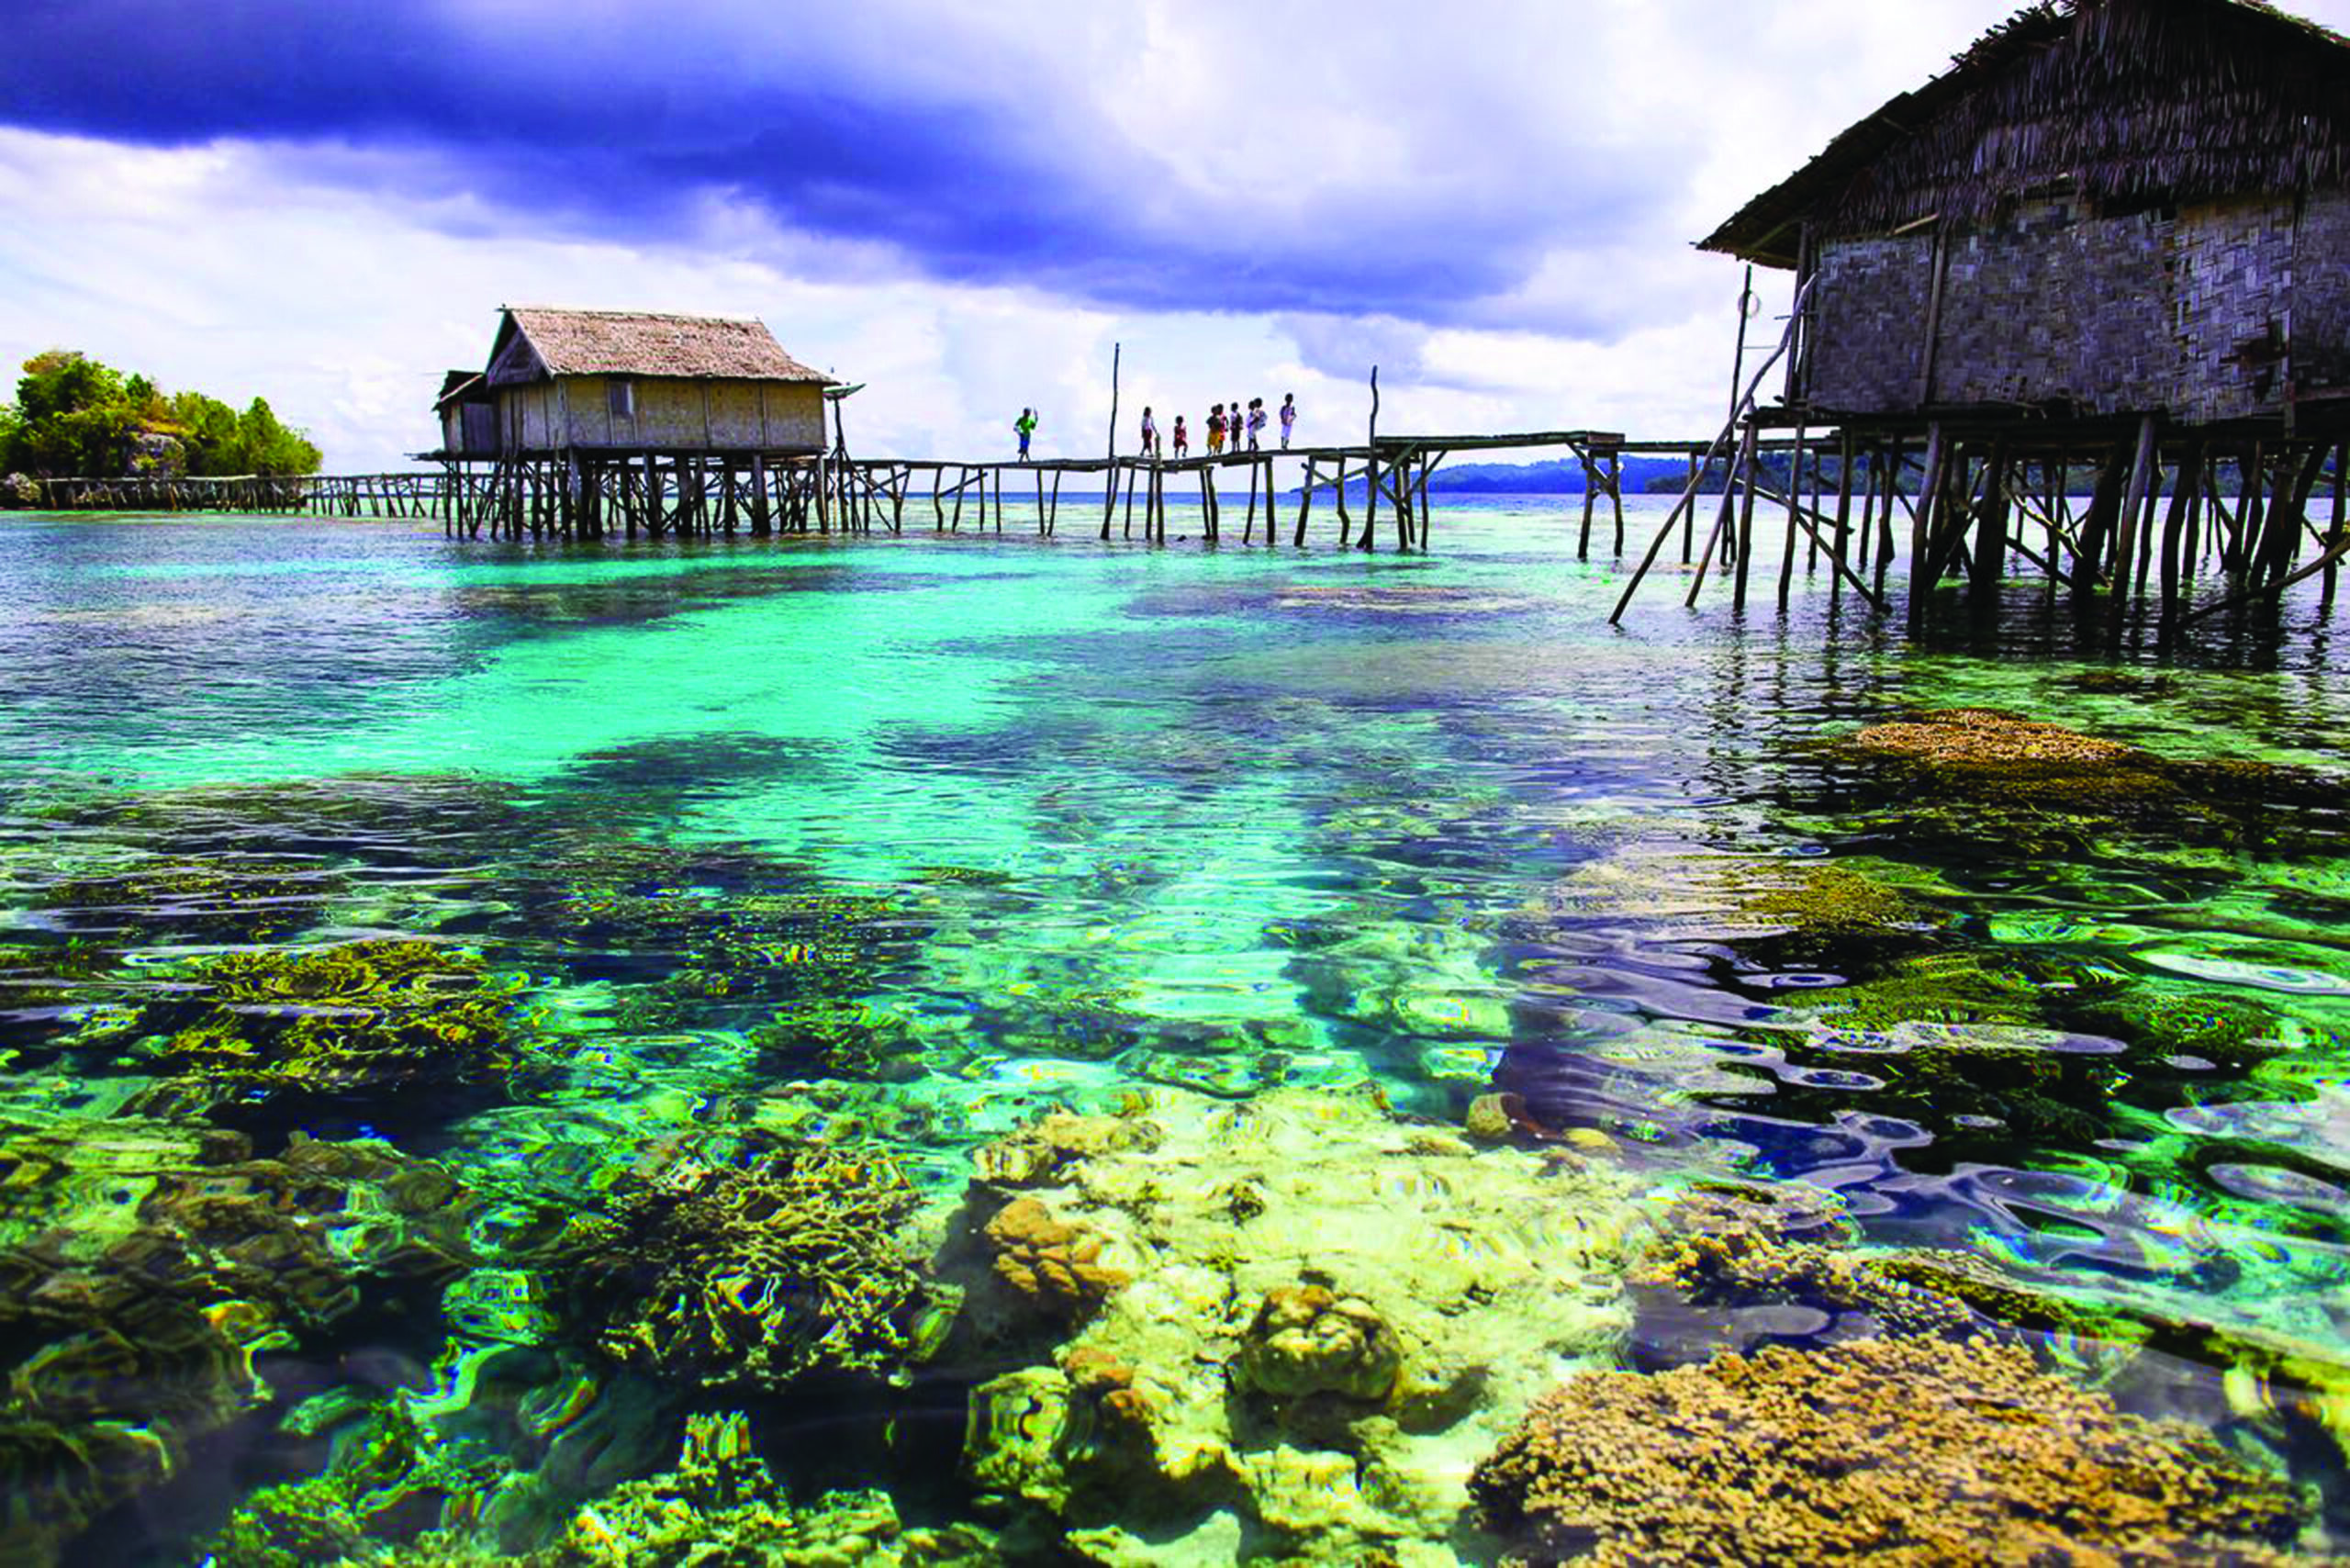 The Togean Islands- home to a host of exotic sea creatures